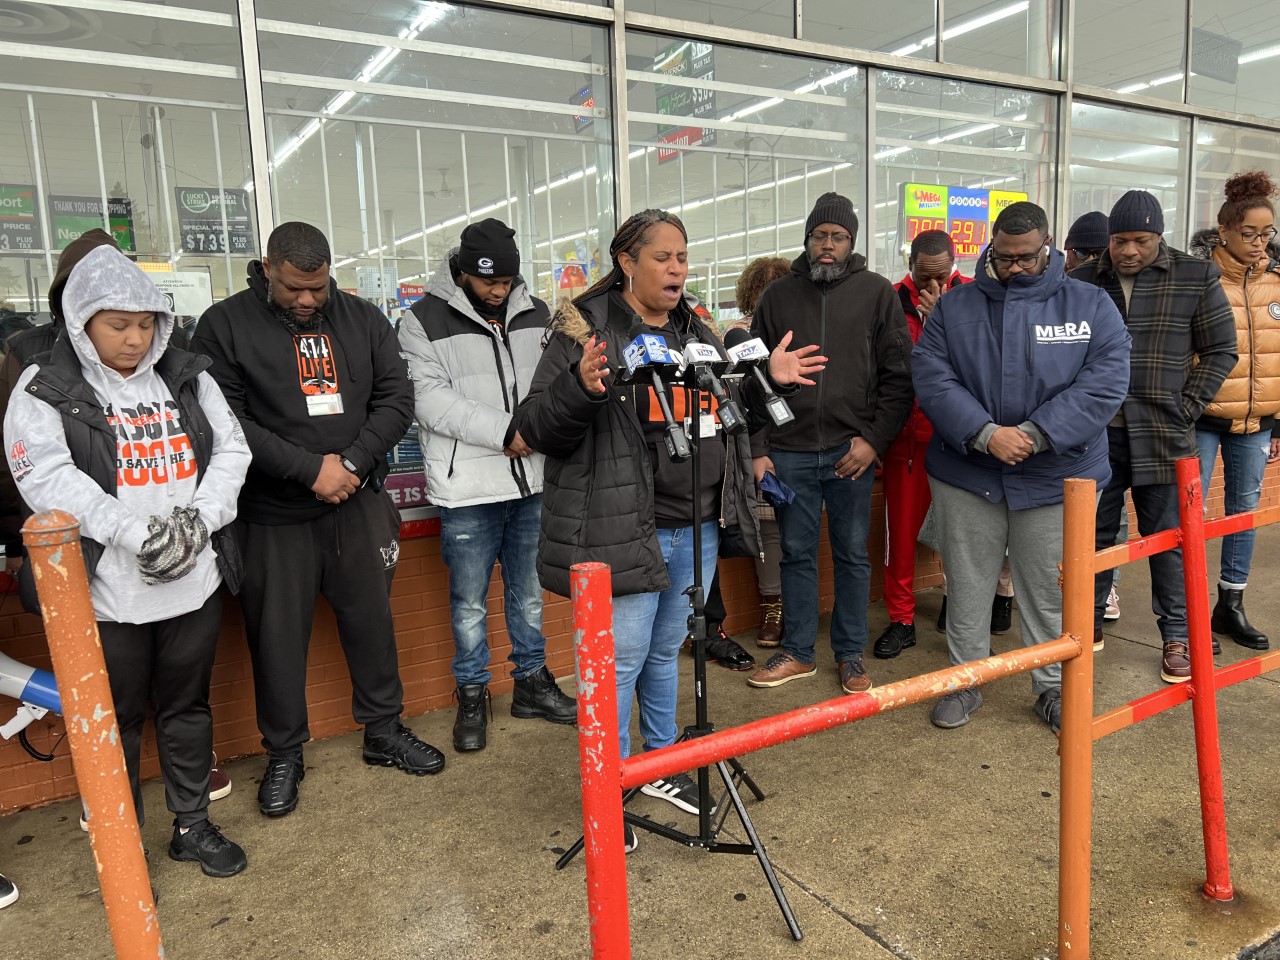 ‘Gun violence is not our story’: Milwaukee leaders call for change after breaking another homicide record